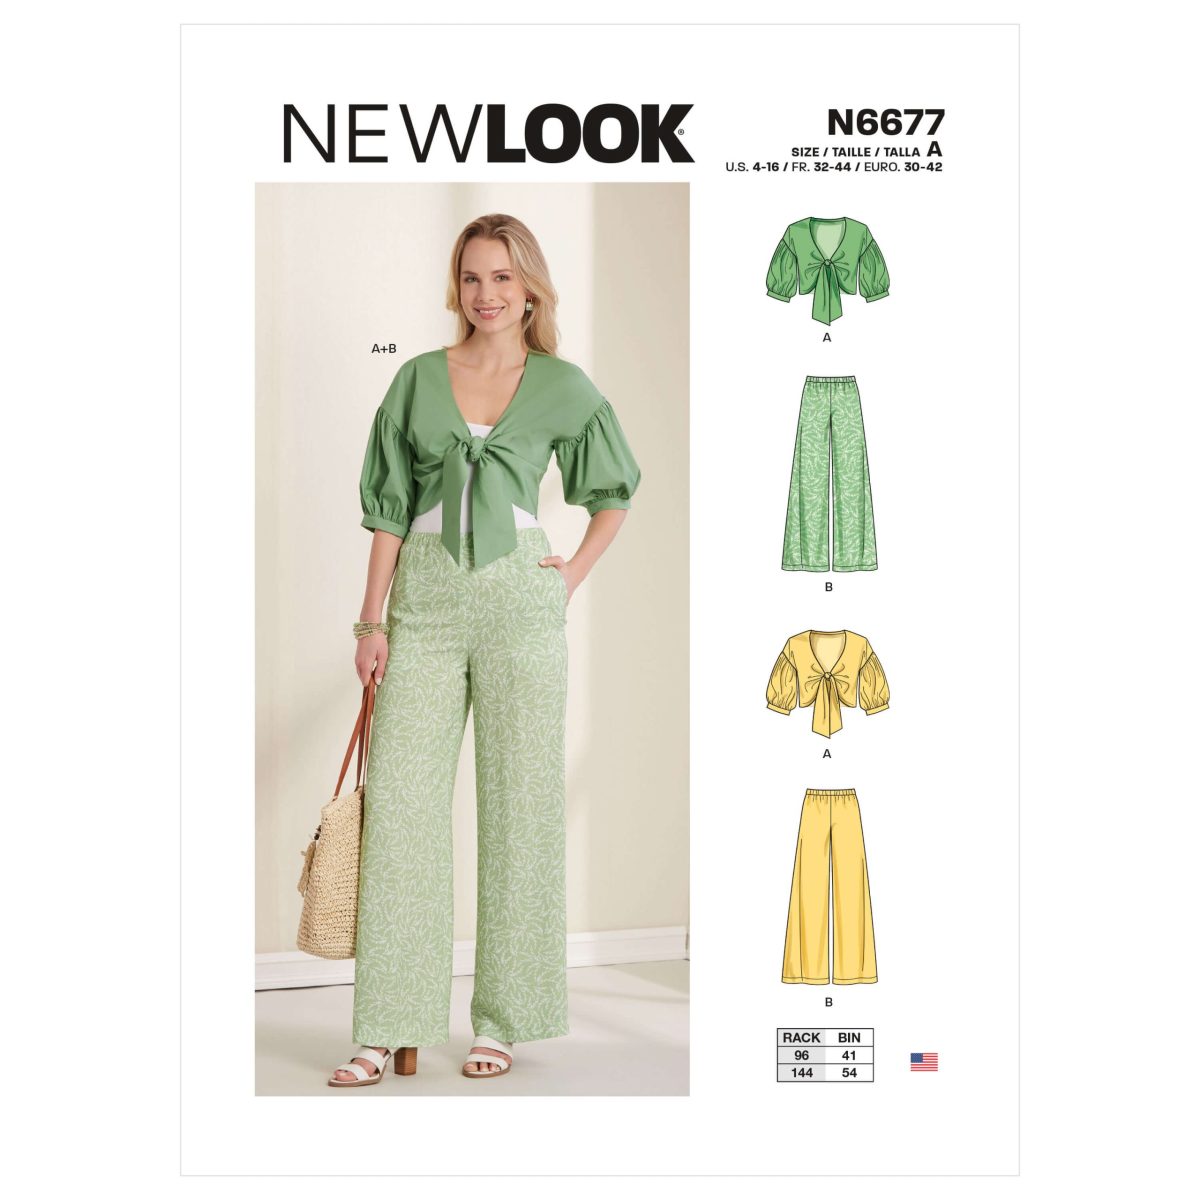 New Look Sewing Pattern N6677 Misses' Cropped Jacket & Trousers